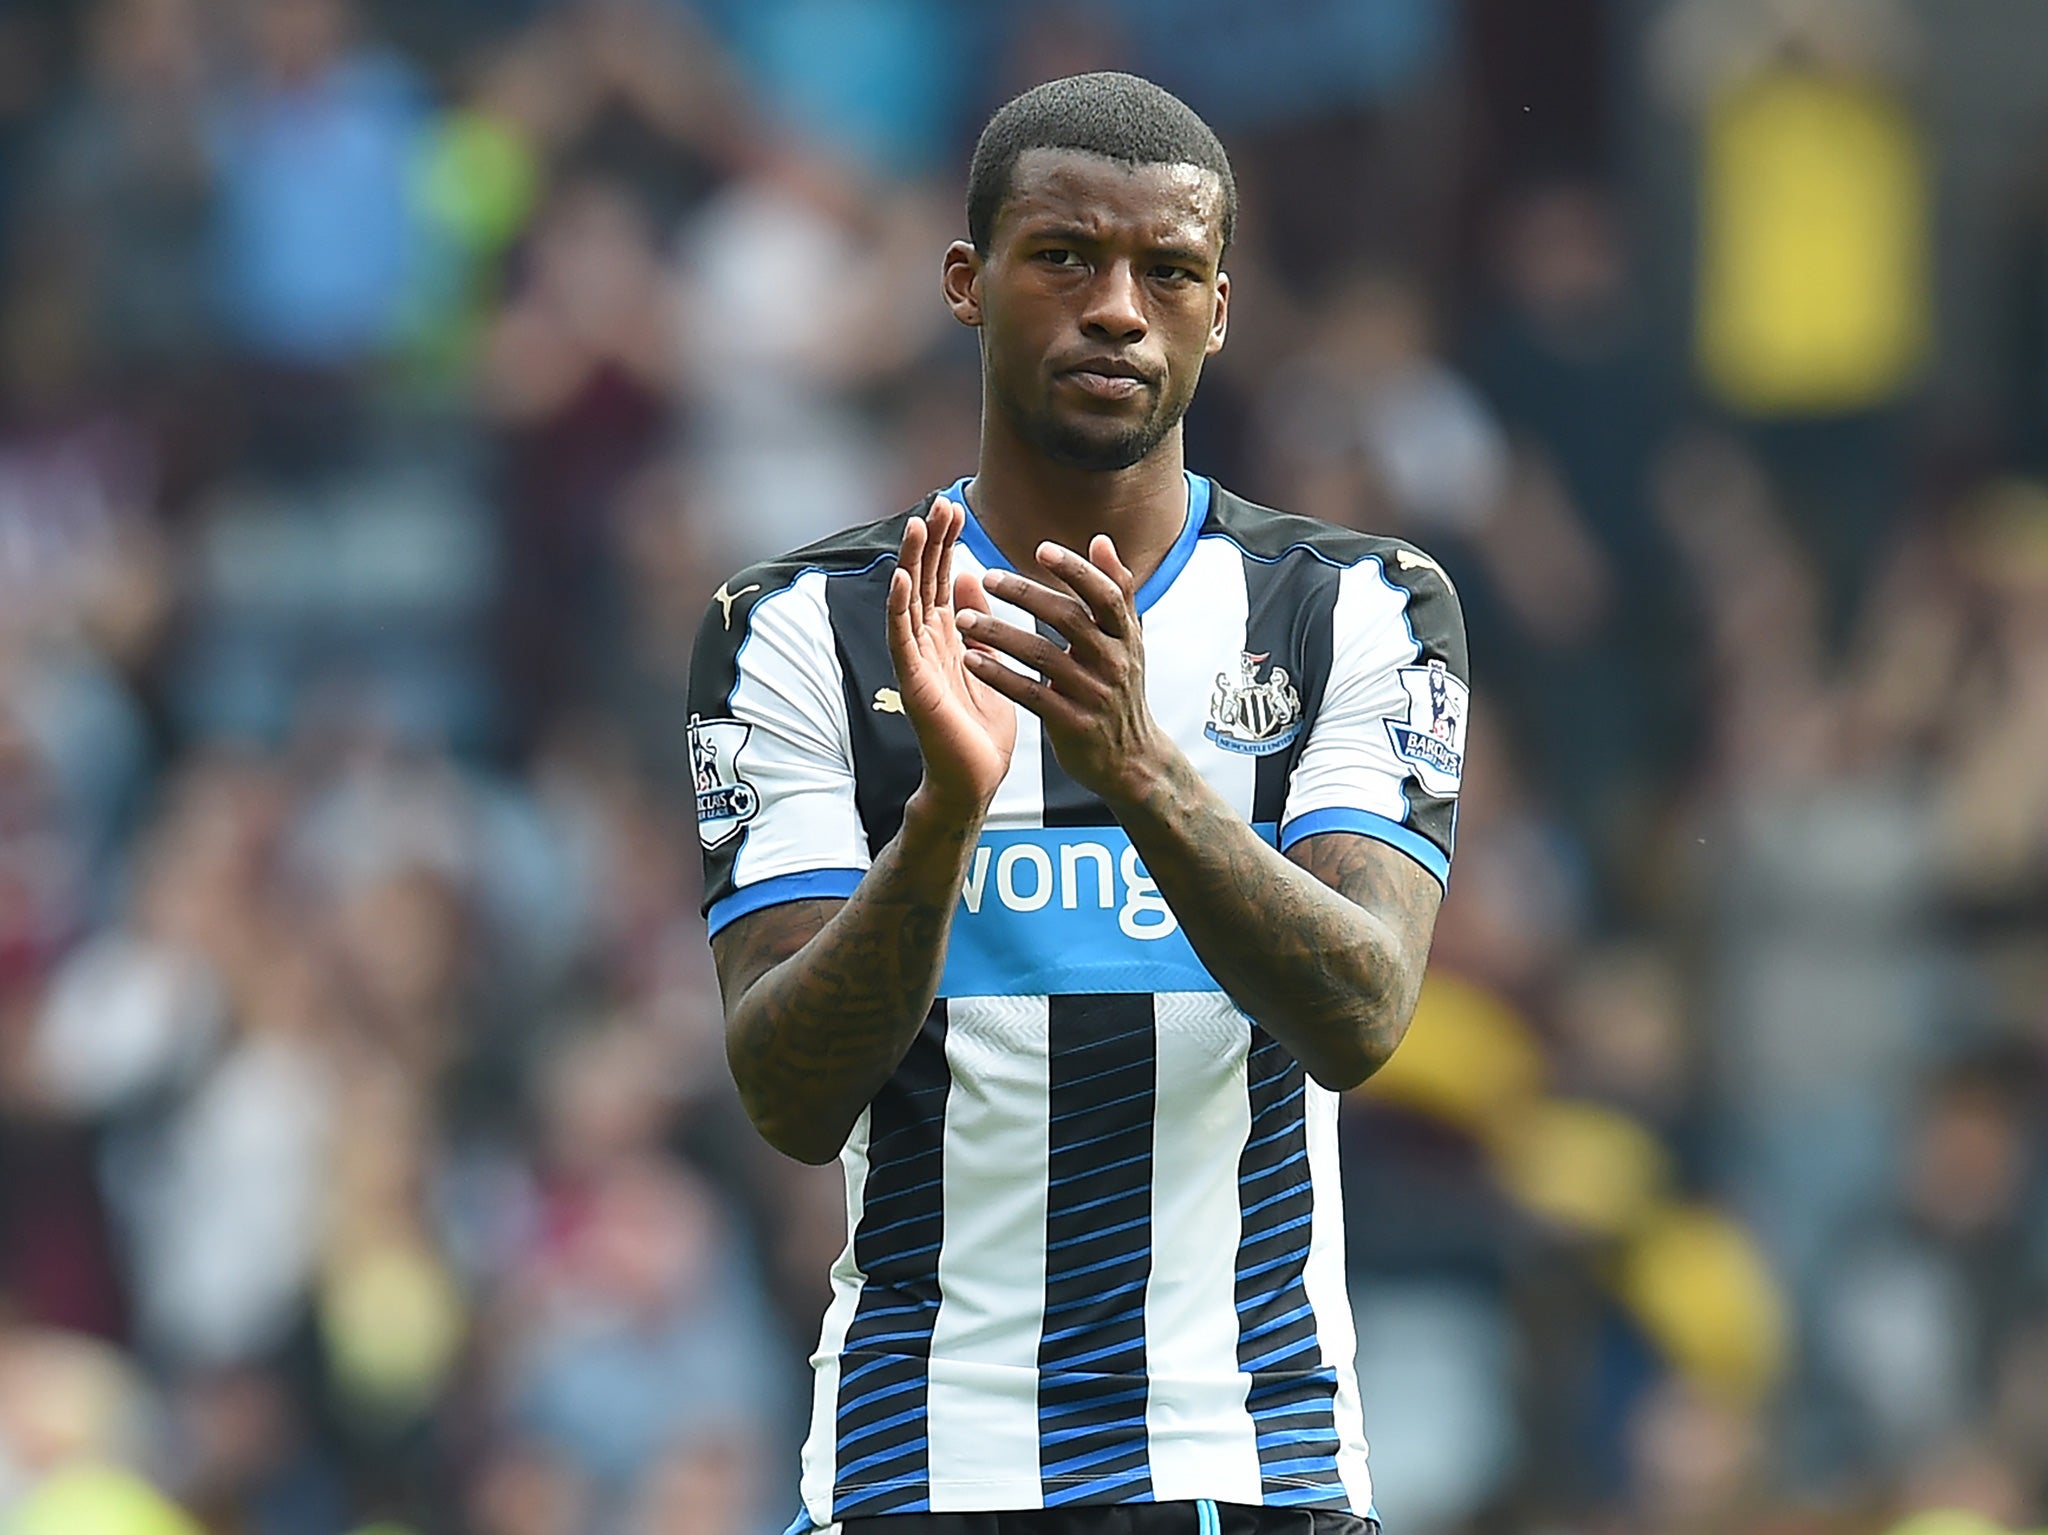 Wijnaldum's name continues to be linked with Anfield